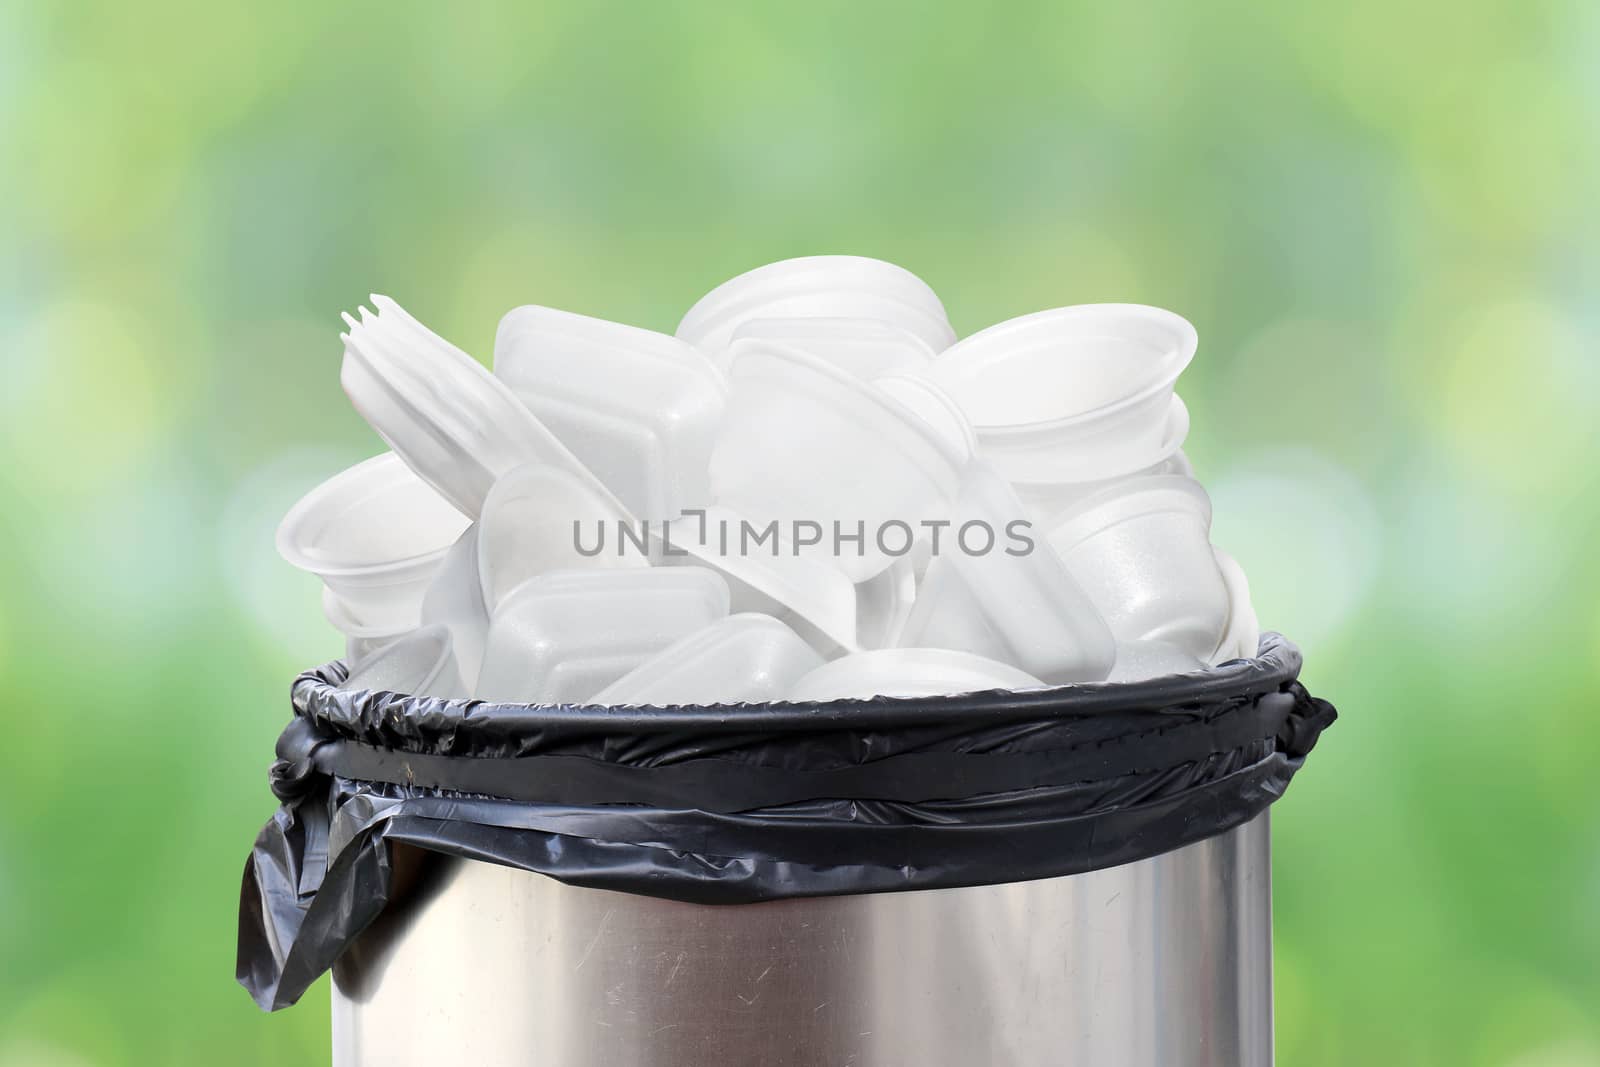 bin of waste foam tray on nature green background, waste garbage foam food tray white many pile on plastic recycle and bin stainless by cgdeaw